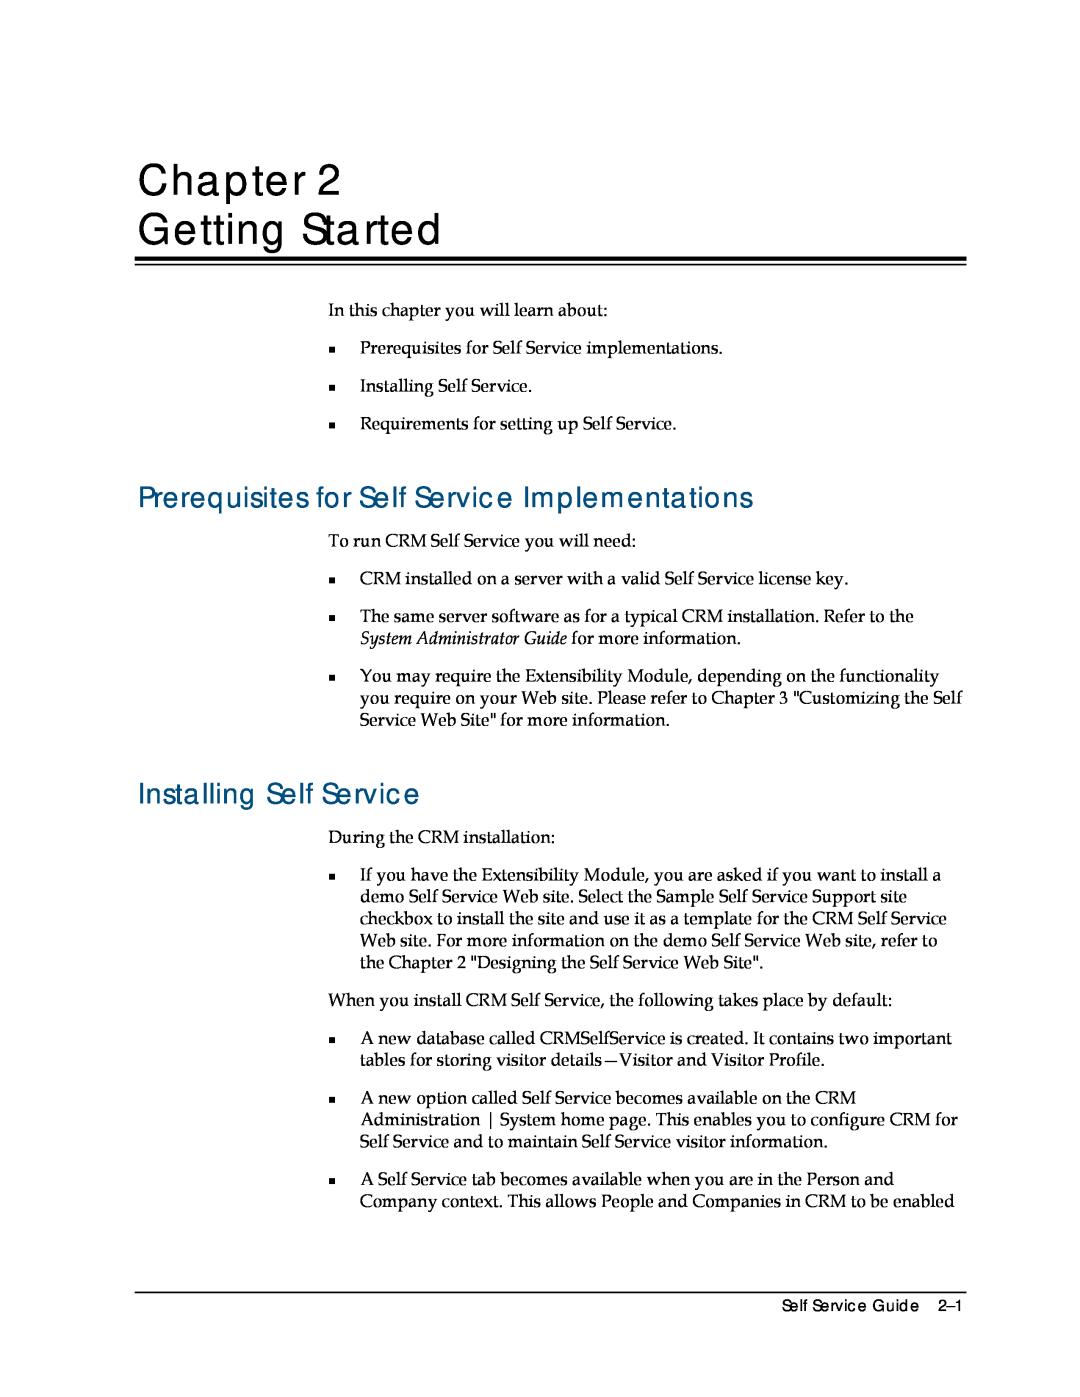 Sage Software 5.8 manual Chapter Getting Started, Prerequisites for Self Service Implementations, Installing Self Service 